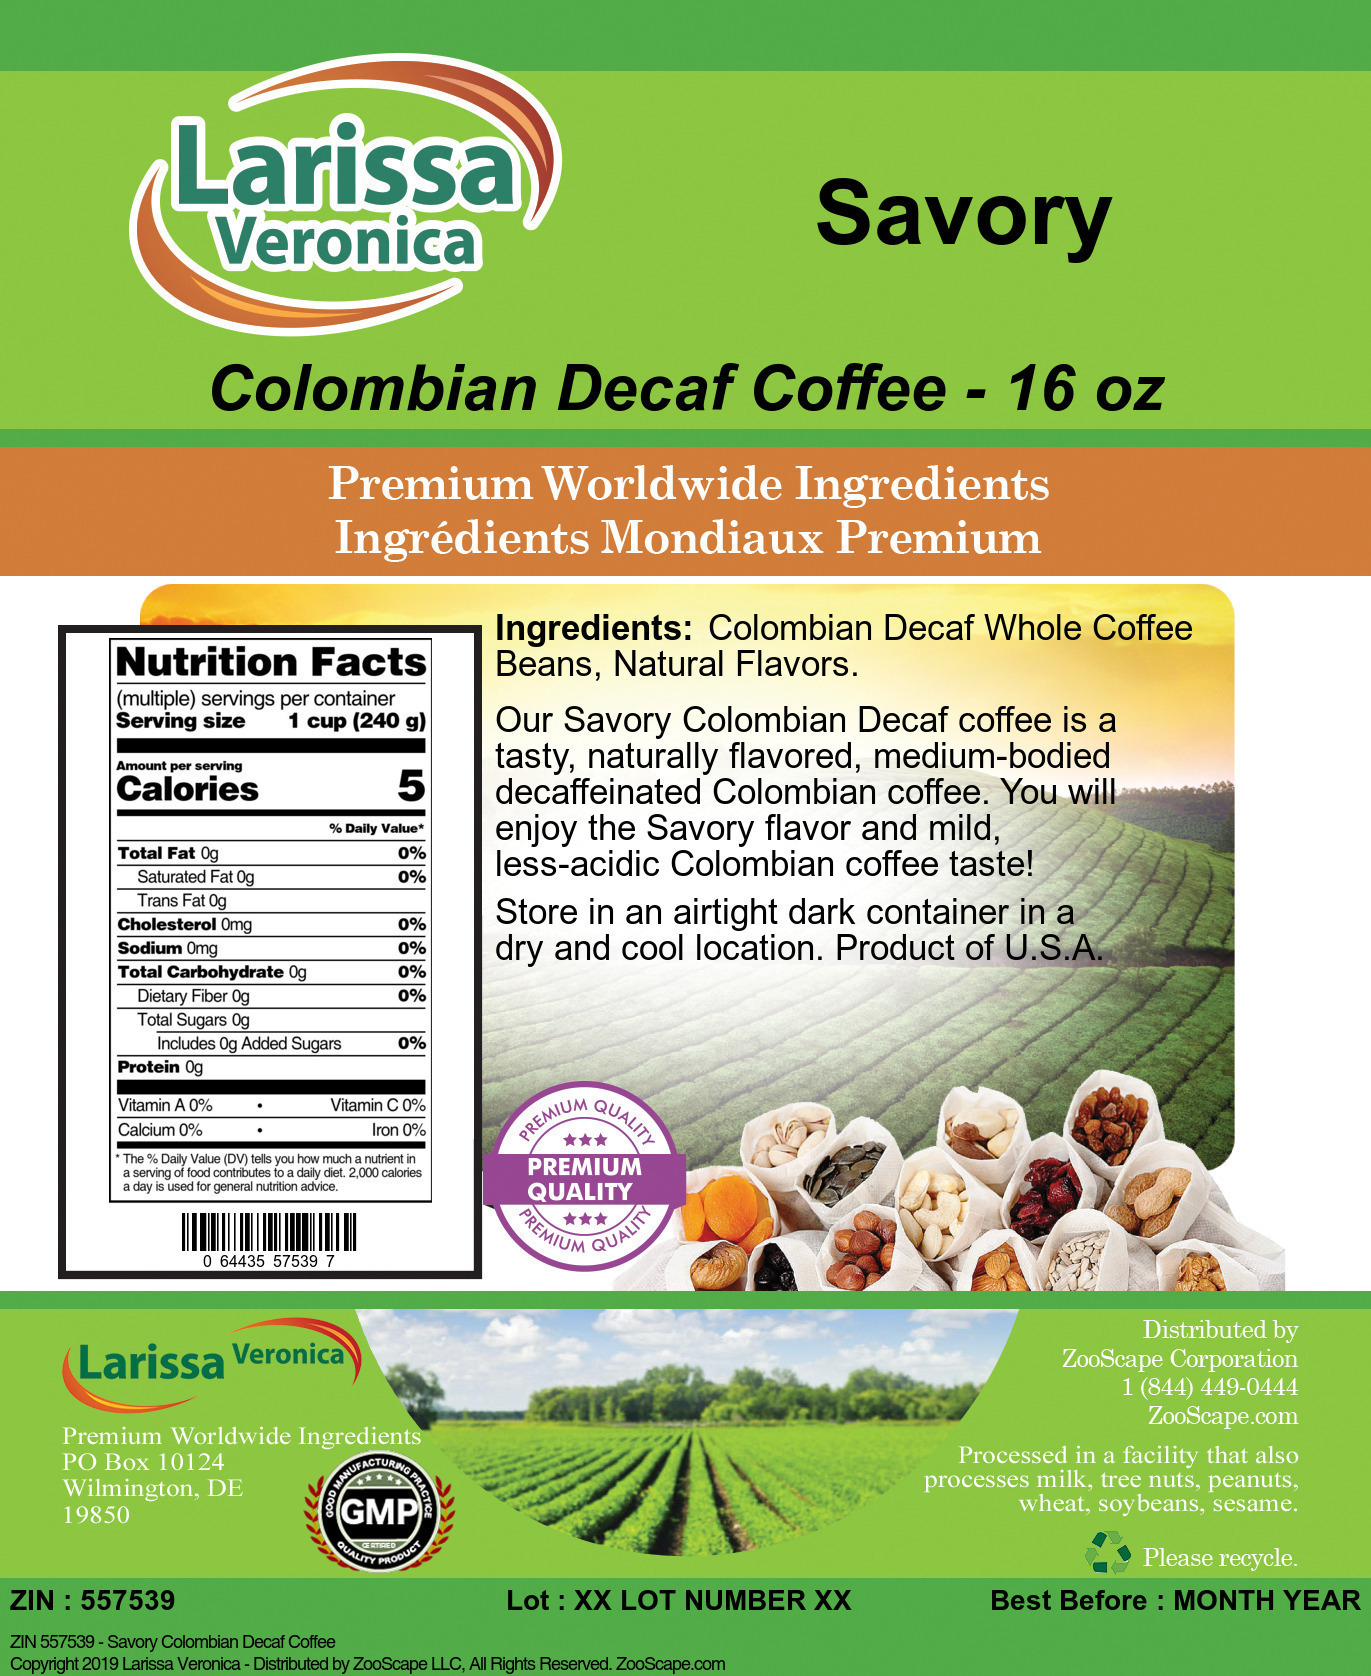 Savory Colombian Decaf Coffee - Label